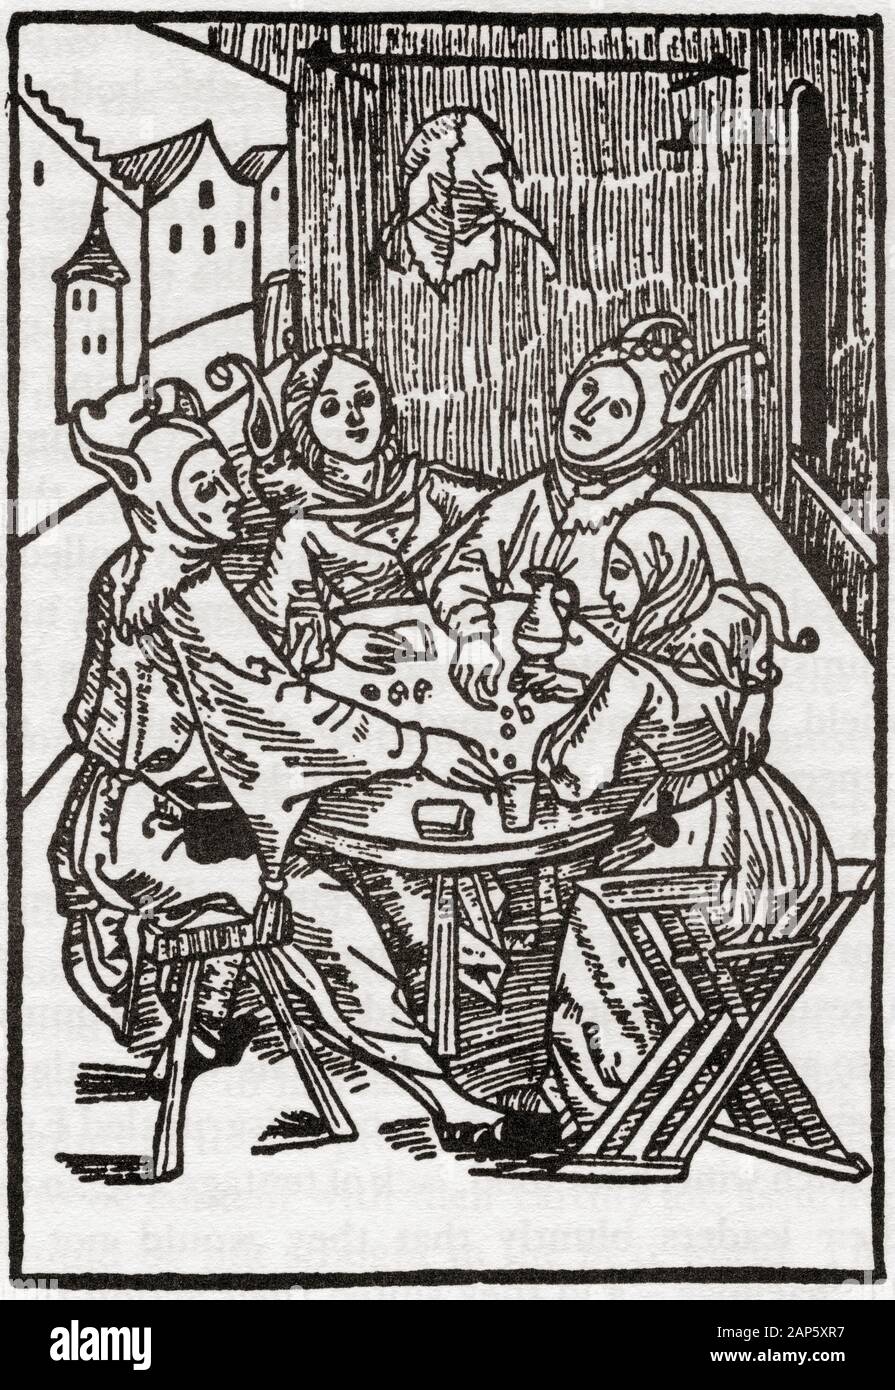 A 16th century gambling school.  Professional card sharks with marked packs and loaded dice took advantage of simple people, this was only one of many criminal activities into which people were forced by unemployment. Stock Photo